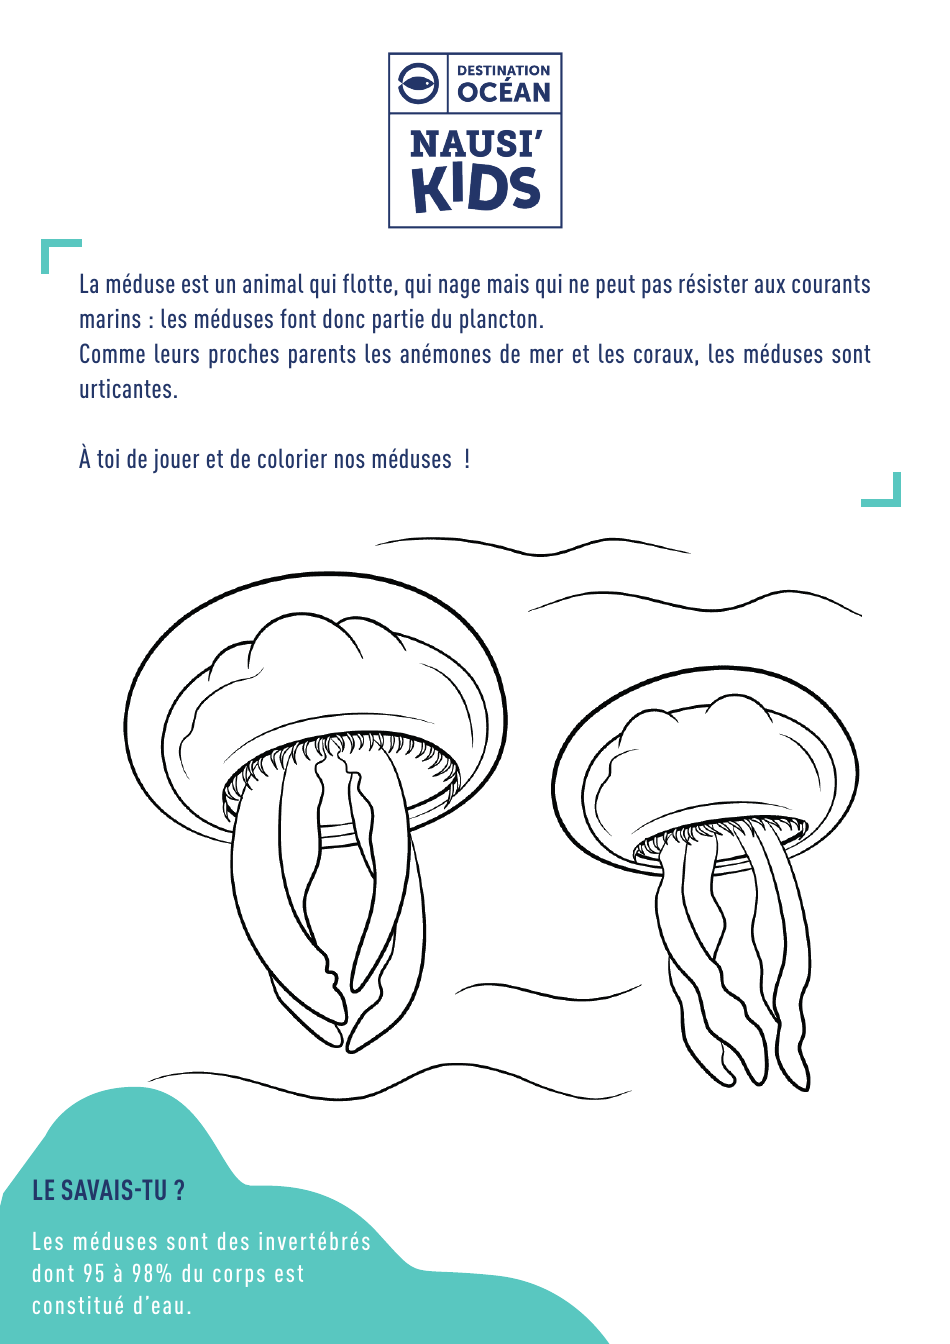 Ocean Fauna Coloring Page - Jellyfish (French)